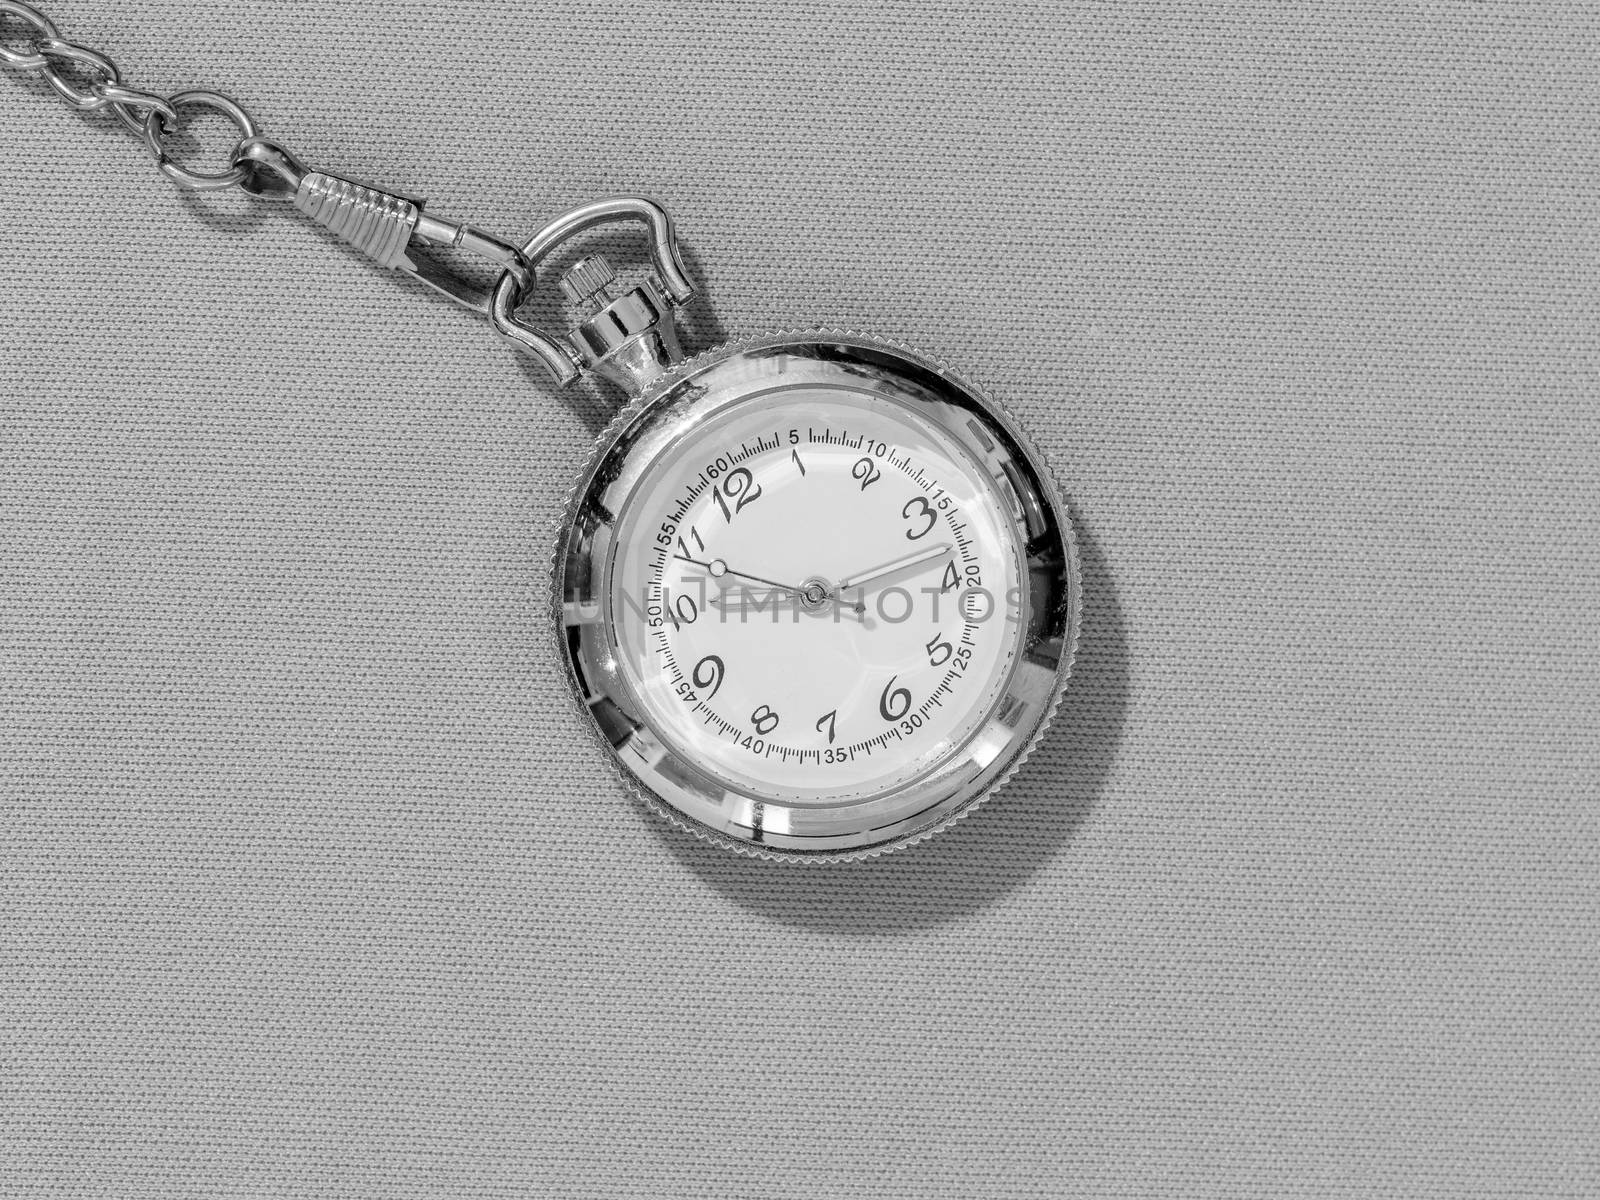 Small steel pocket watch with white dial, black and white image of metal object on uniform background